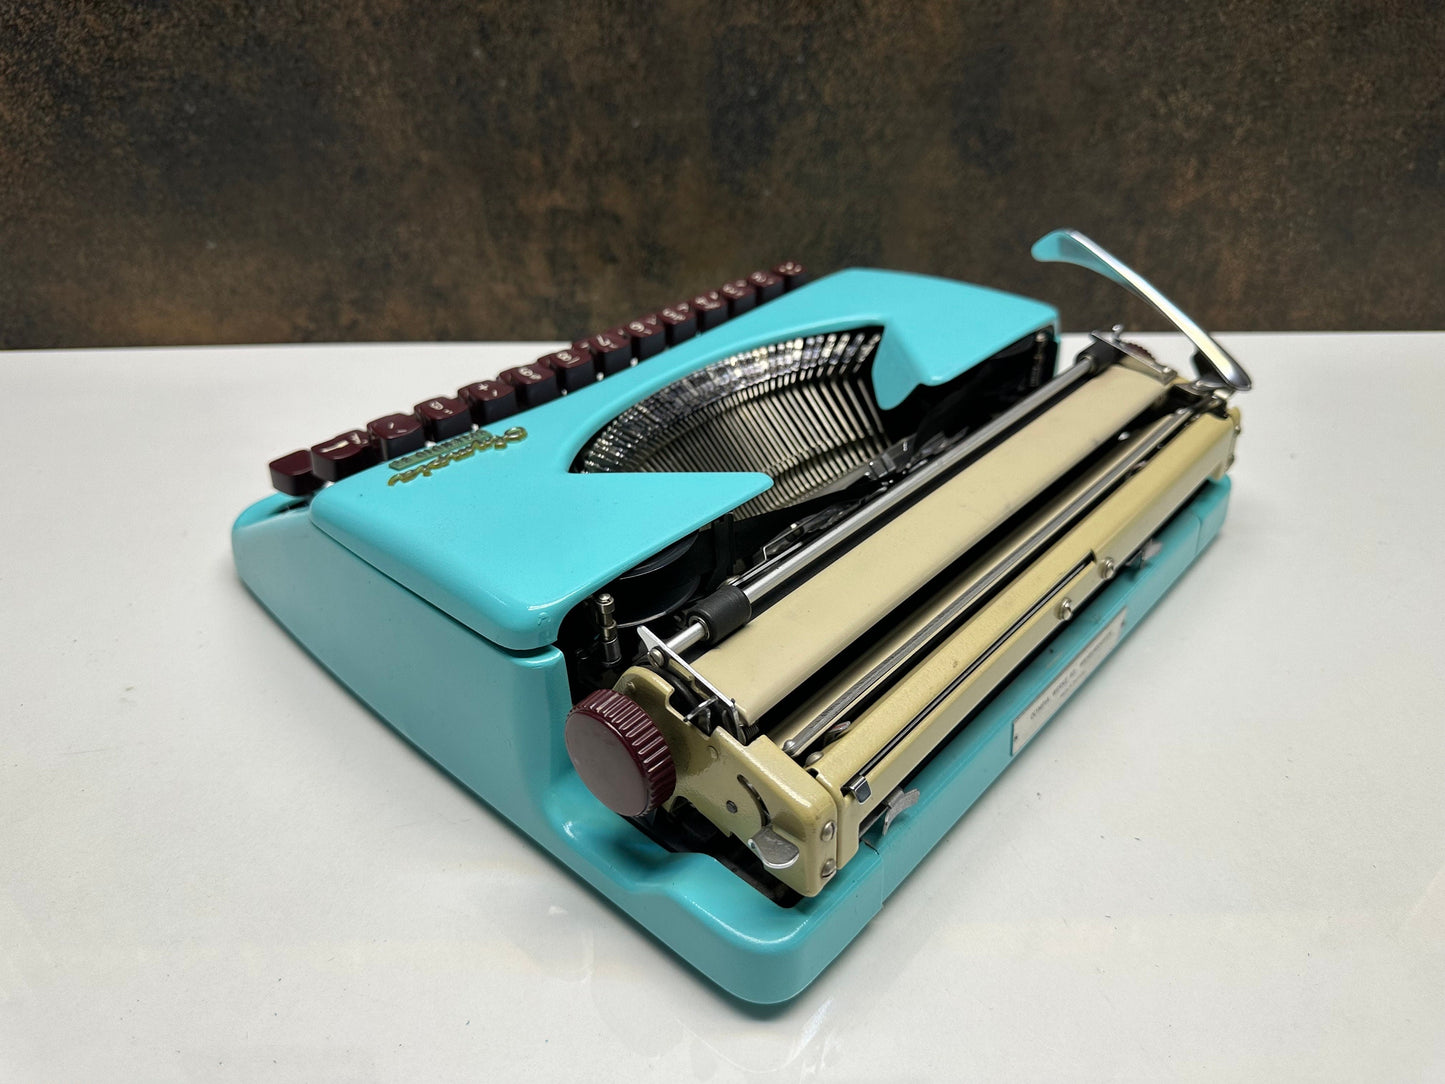 Antique Olympia Splendid 33/66 Turquoise Typewriter with Matching Case and Burgundy Keys | Rare Mechanical Keyboard for Writers and Collecto